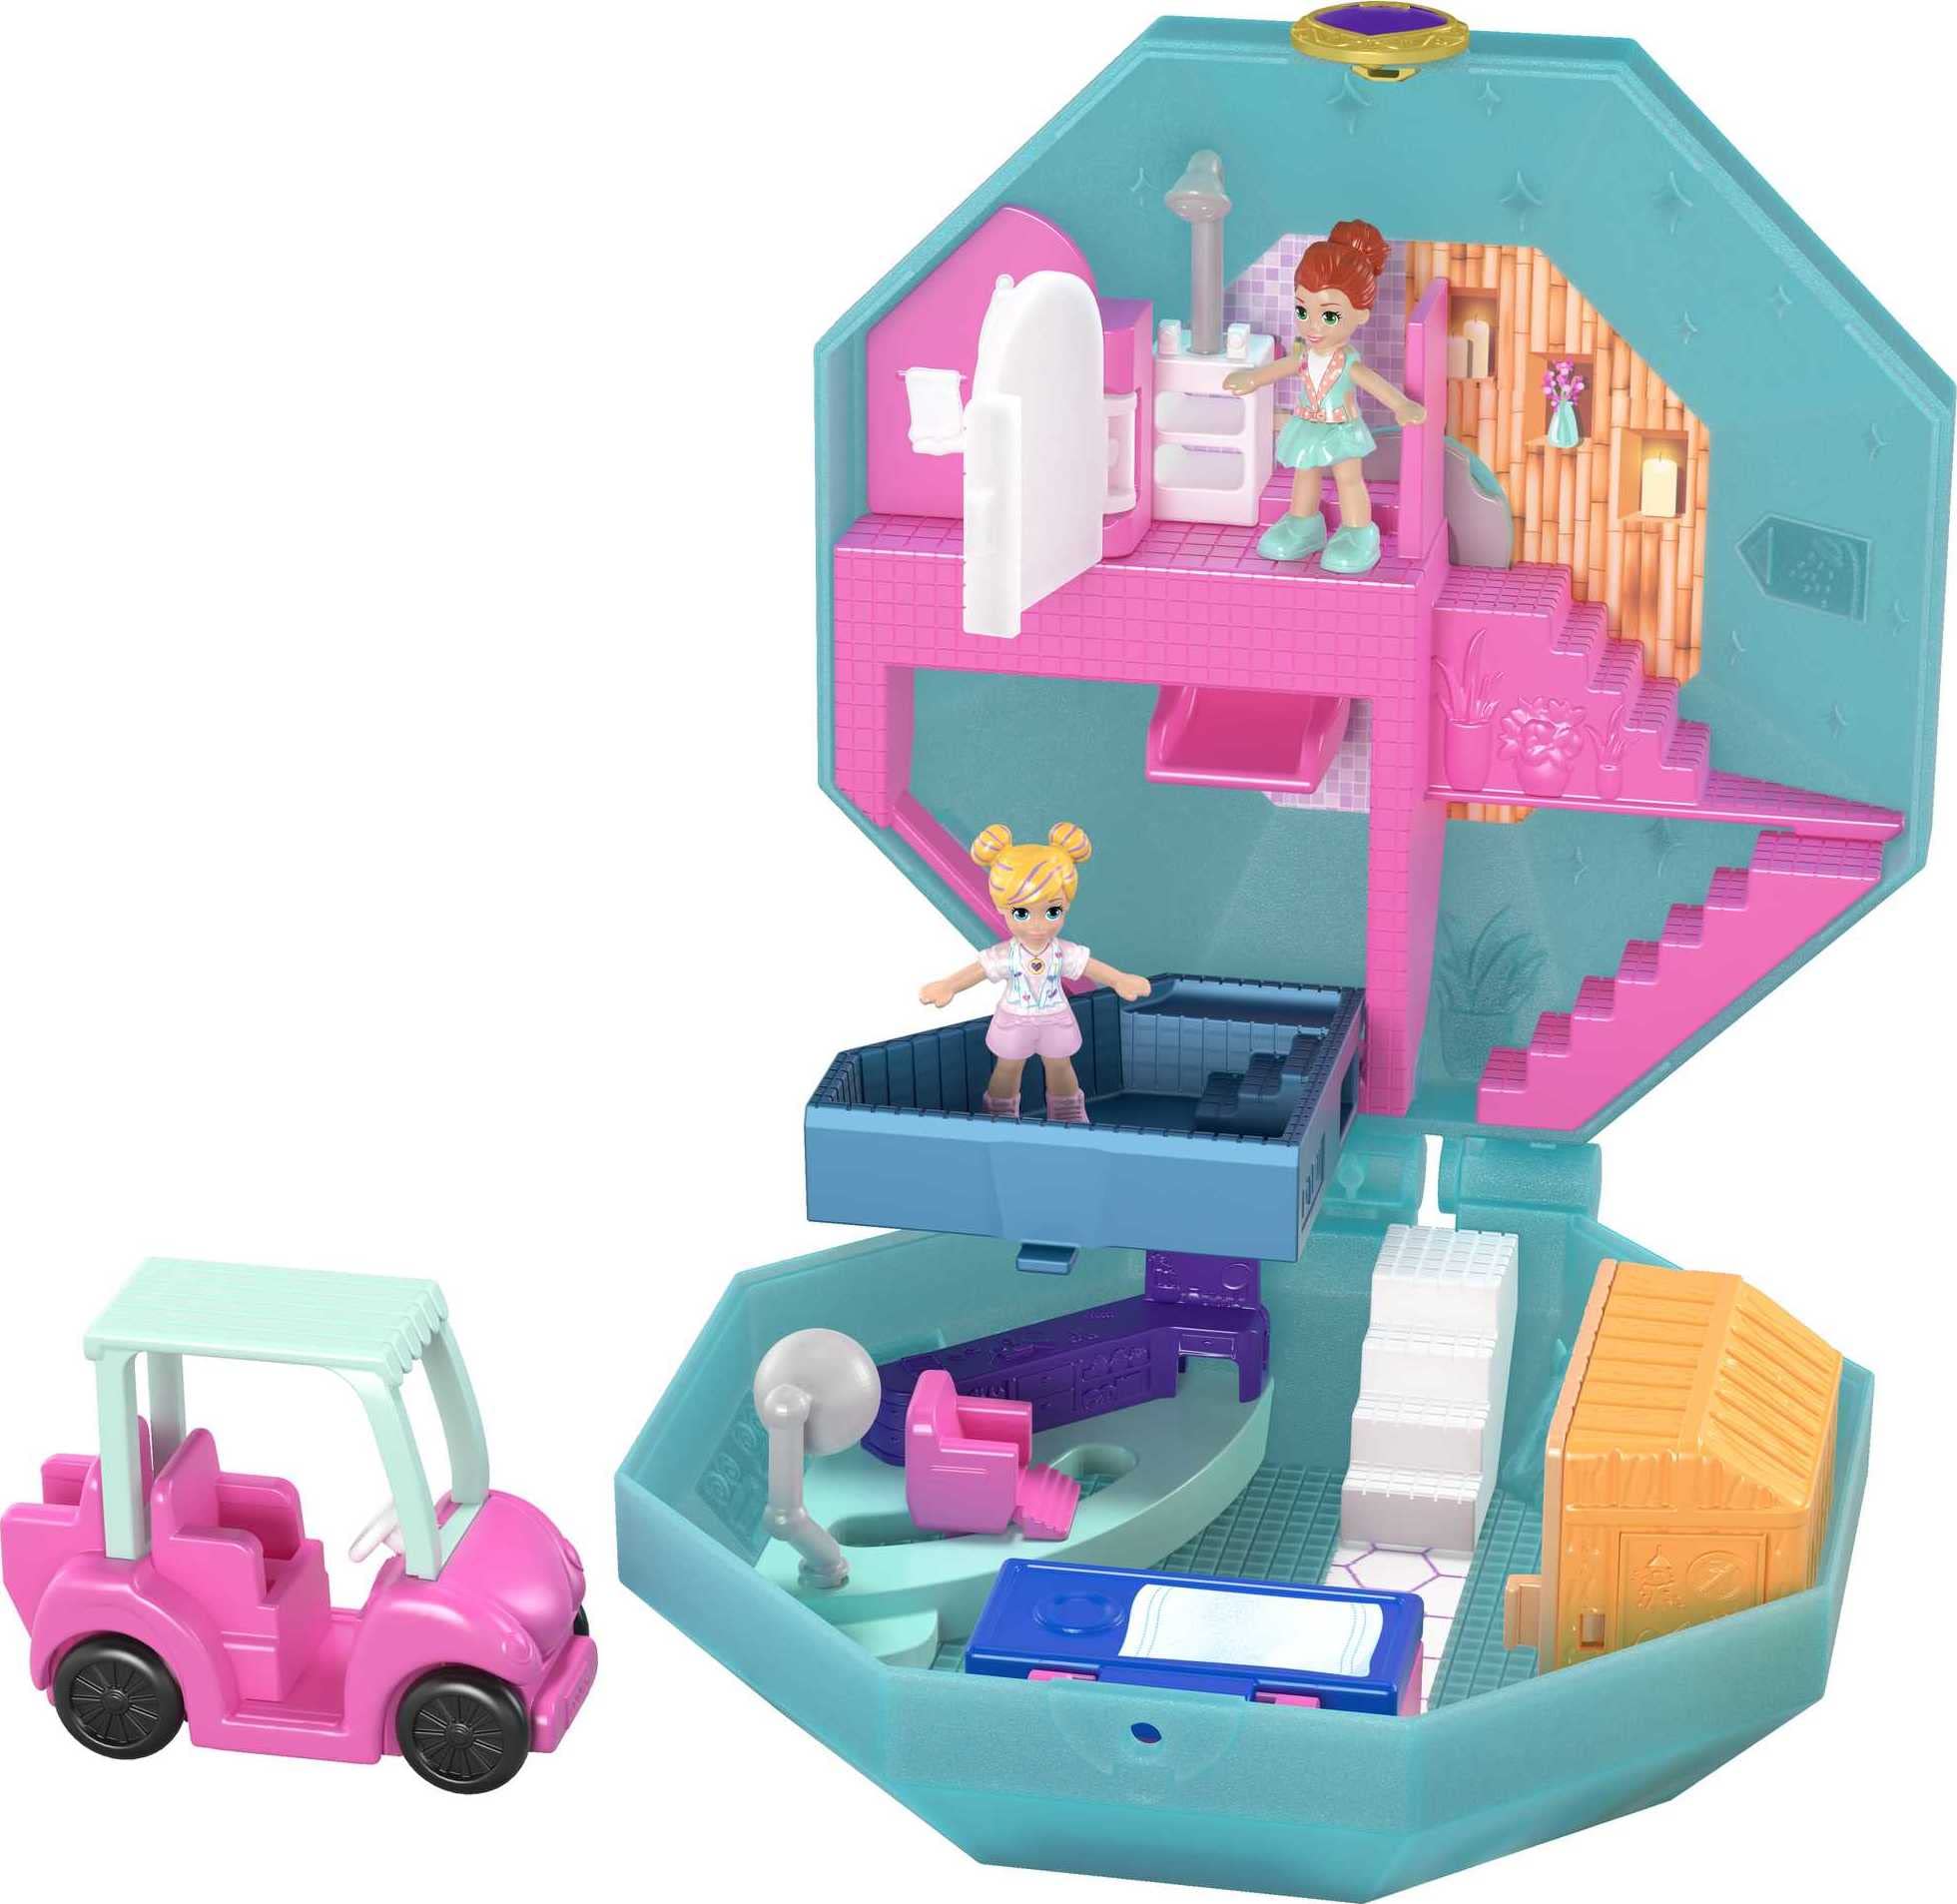 Polly Pocket Playset, Travel Toy with 2 Micro Dolls, Toy Car & Surprise Accessories, Pamperin Perfume Spa Compact